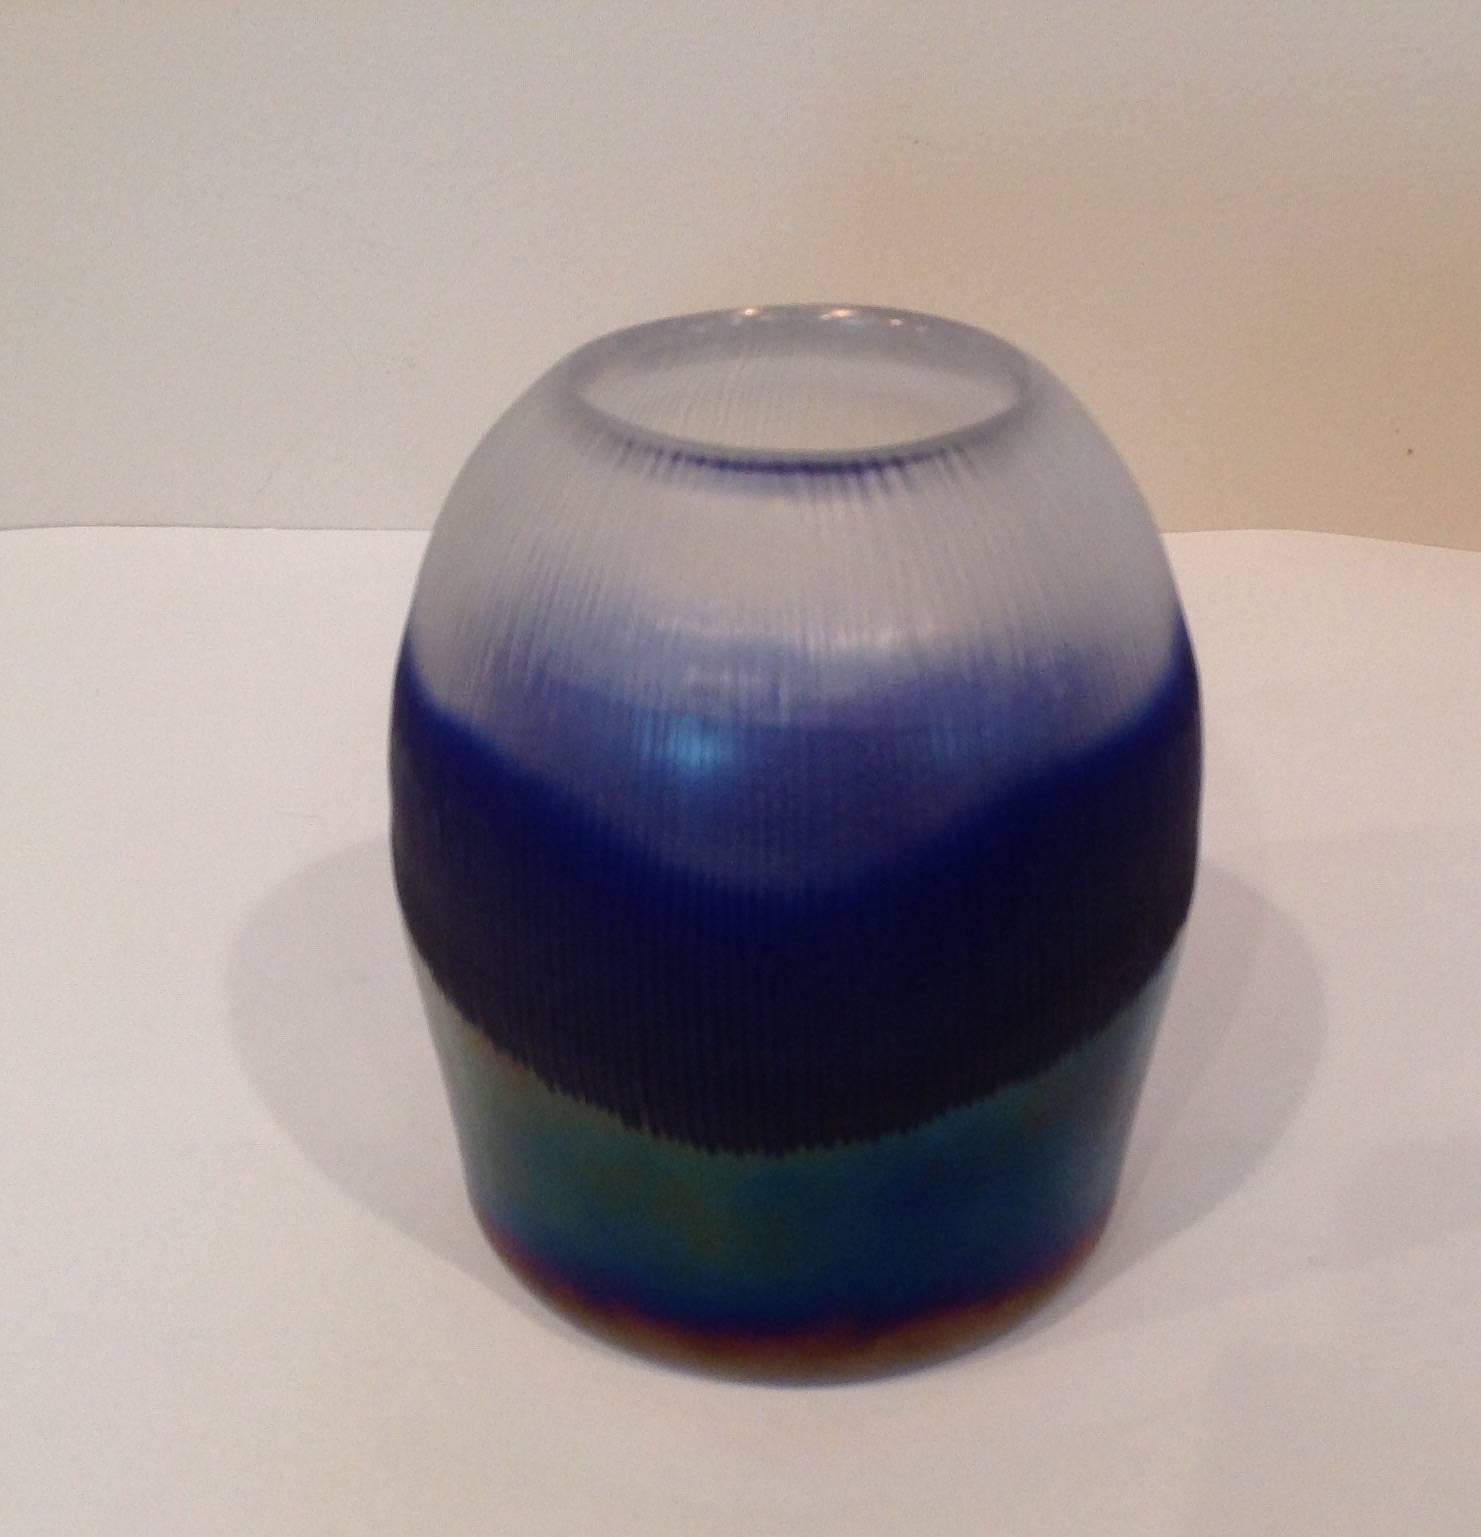 A rare inciso encalmo vase designed by Thomas Stearns for Venini. Original label and three line acid stamp. Two examples of this model exhibited at the corning museum of glass in the Steinberg foundation collection.